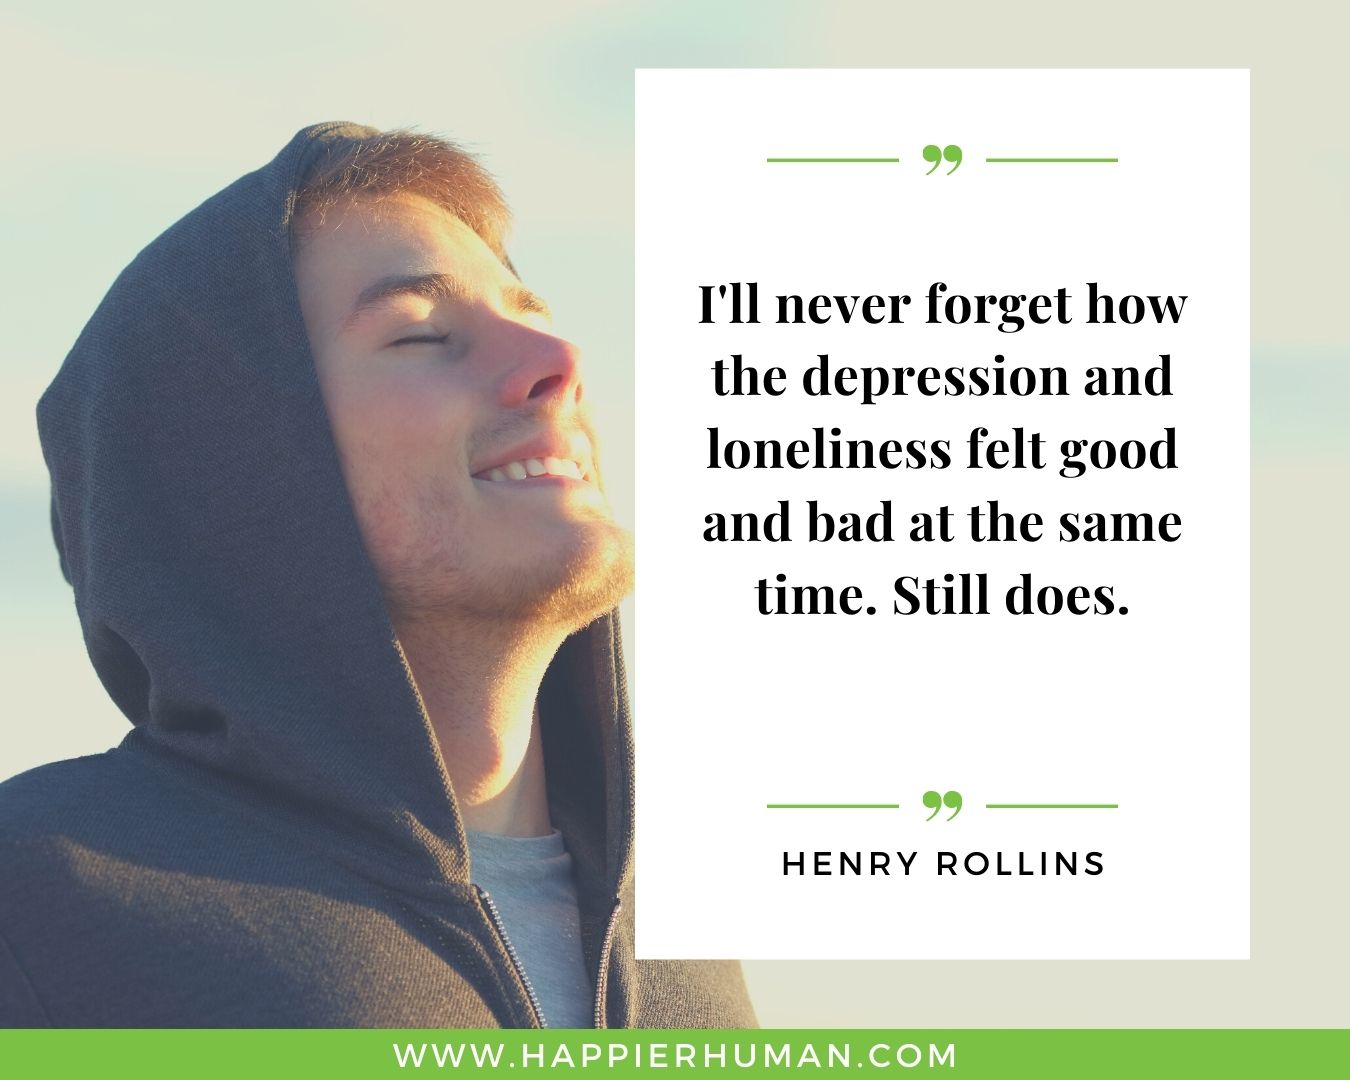 Loneliness Quotes - “I'll never forget how the depression and loneliness felt good and bad at the same time. Still does.” – Henry Rollins